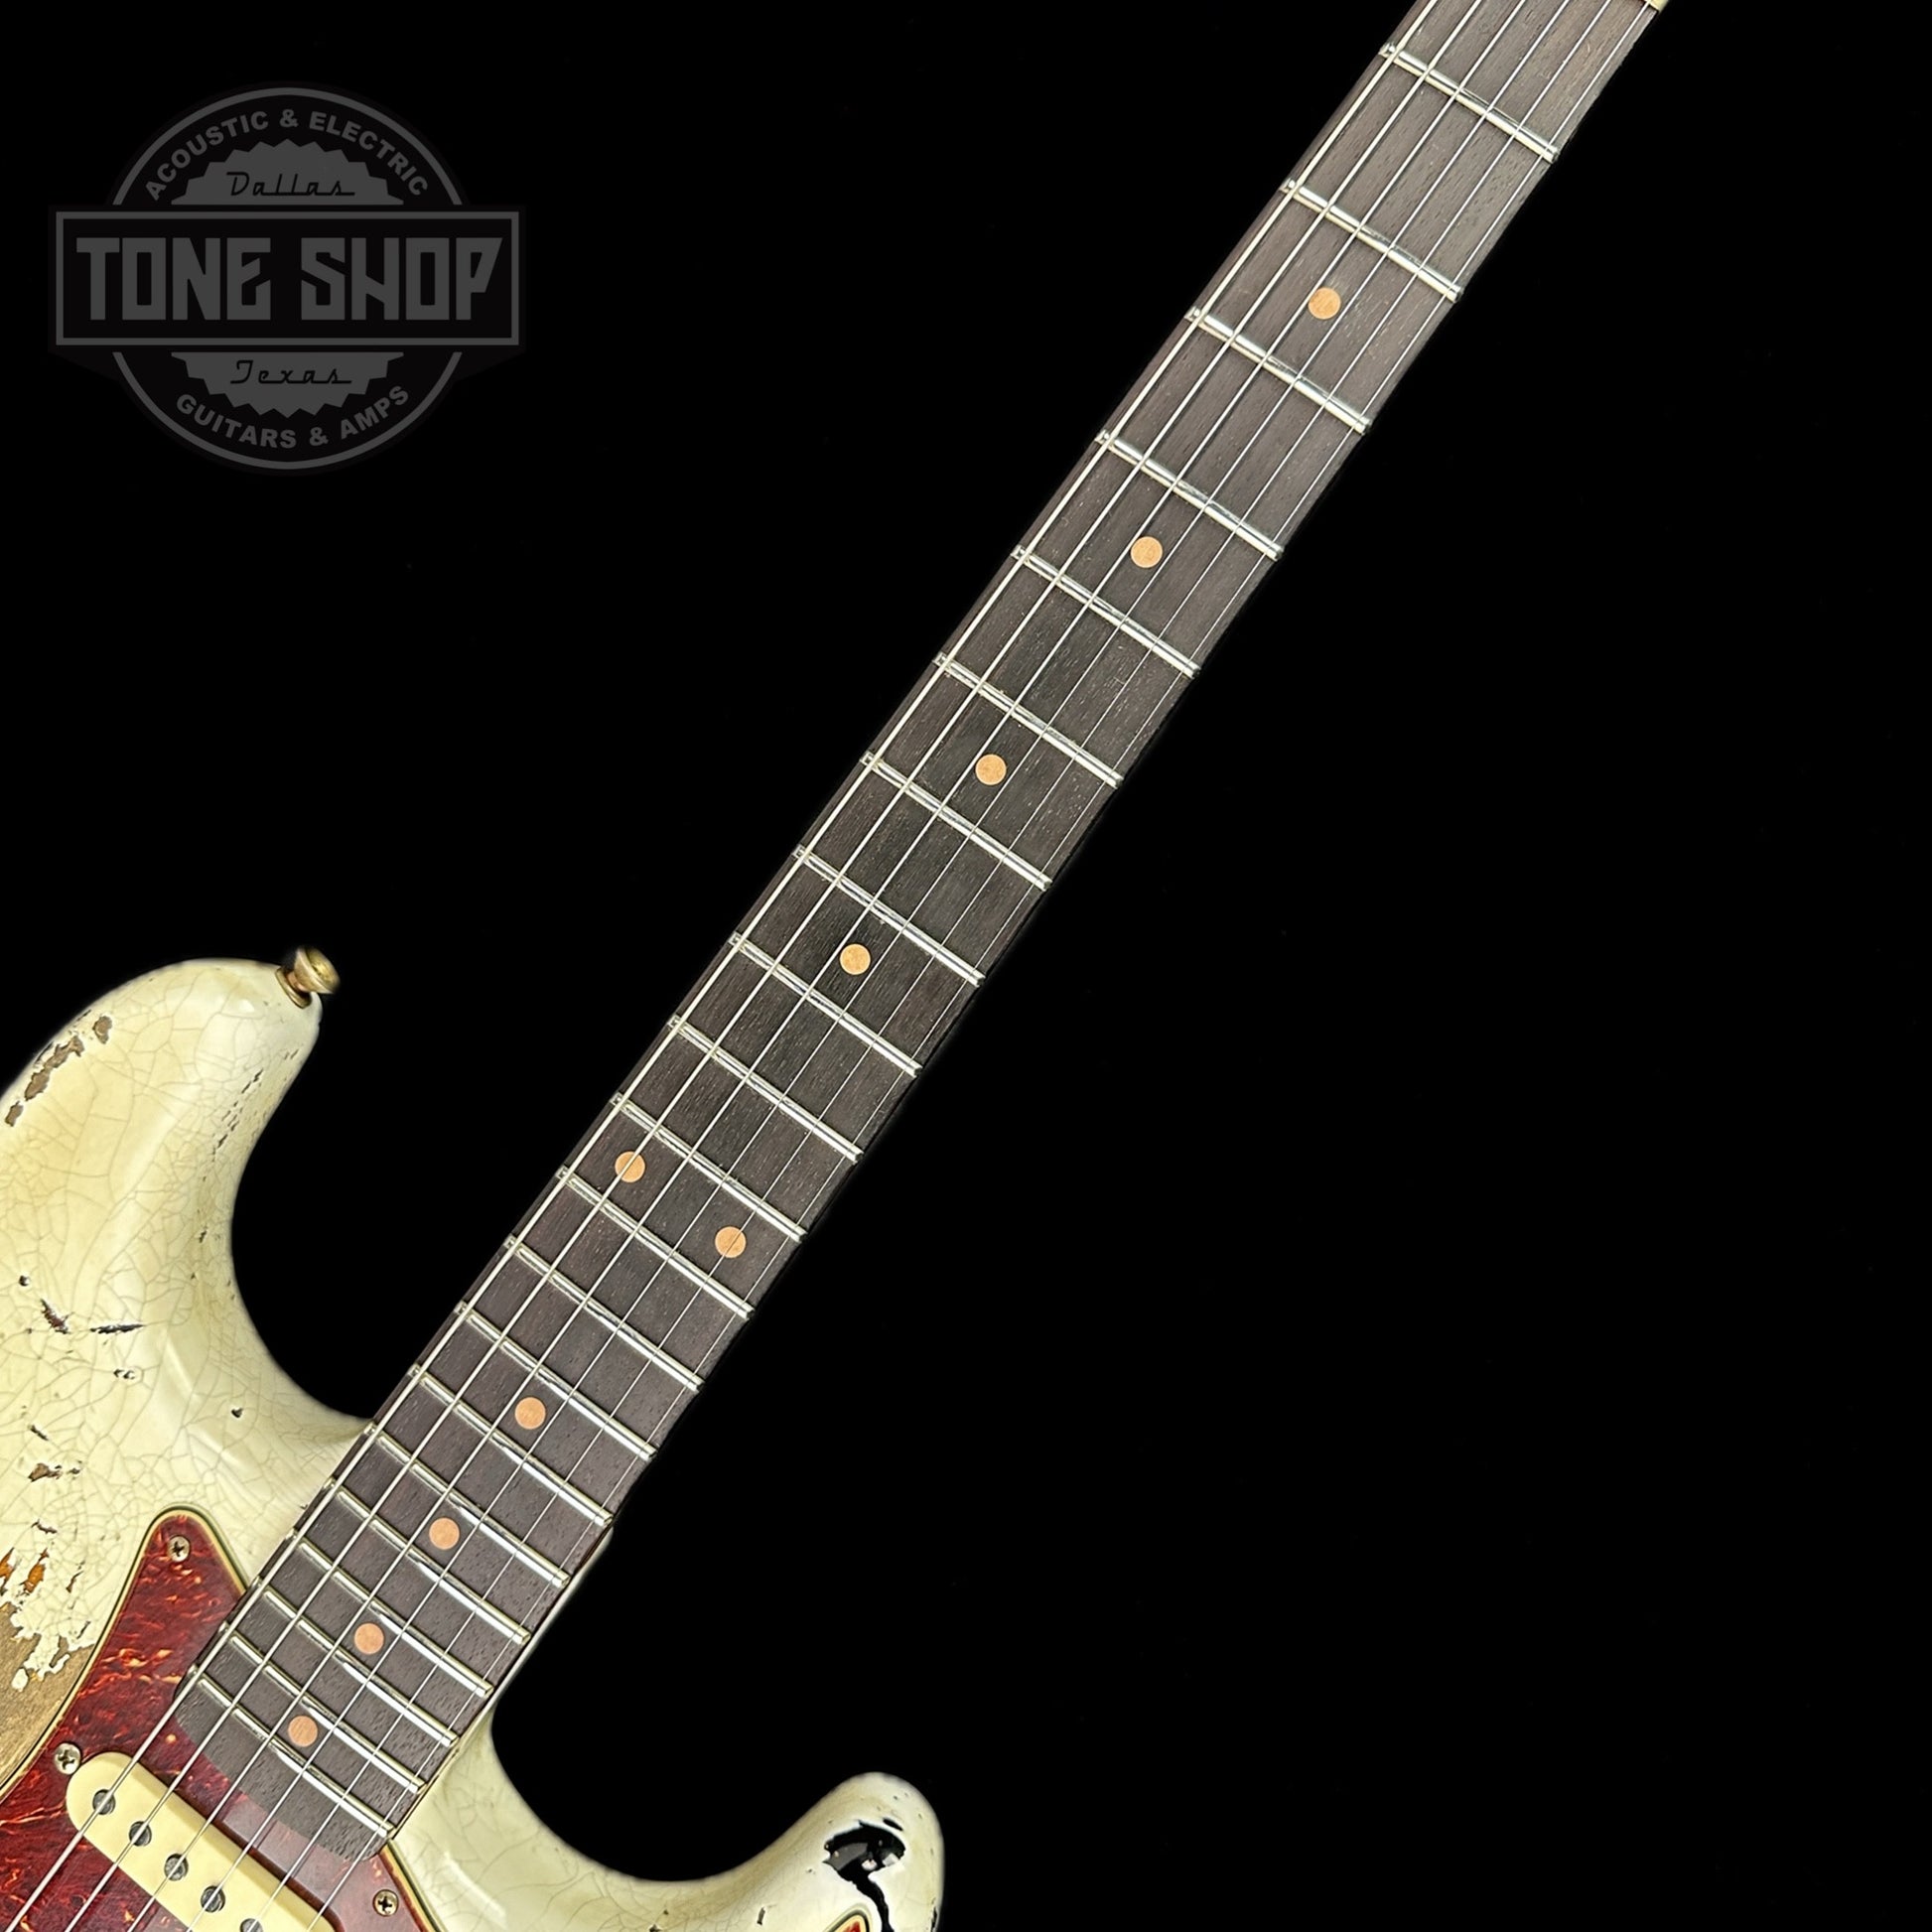 Fretboard of Fender Custom Shop Limited Edition Roasted '60 Strat Super Heavy Relic Aged Olympic White Over 3 Color Sunburst.